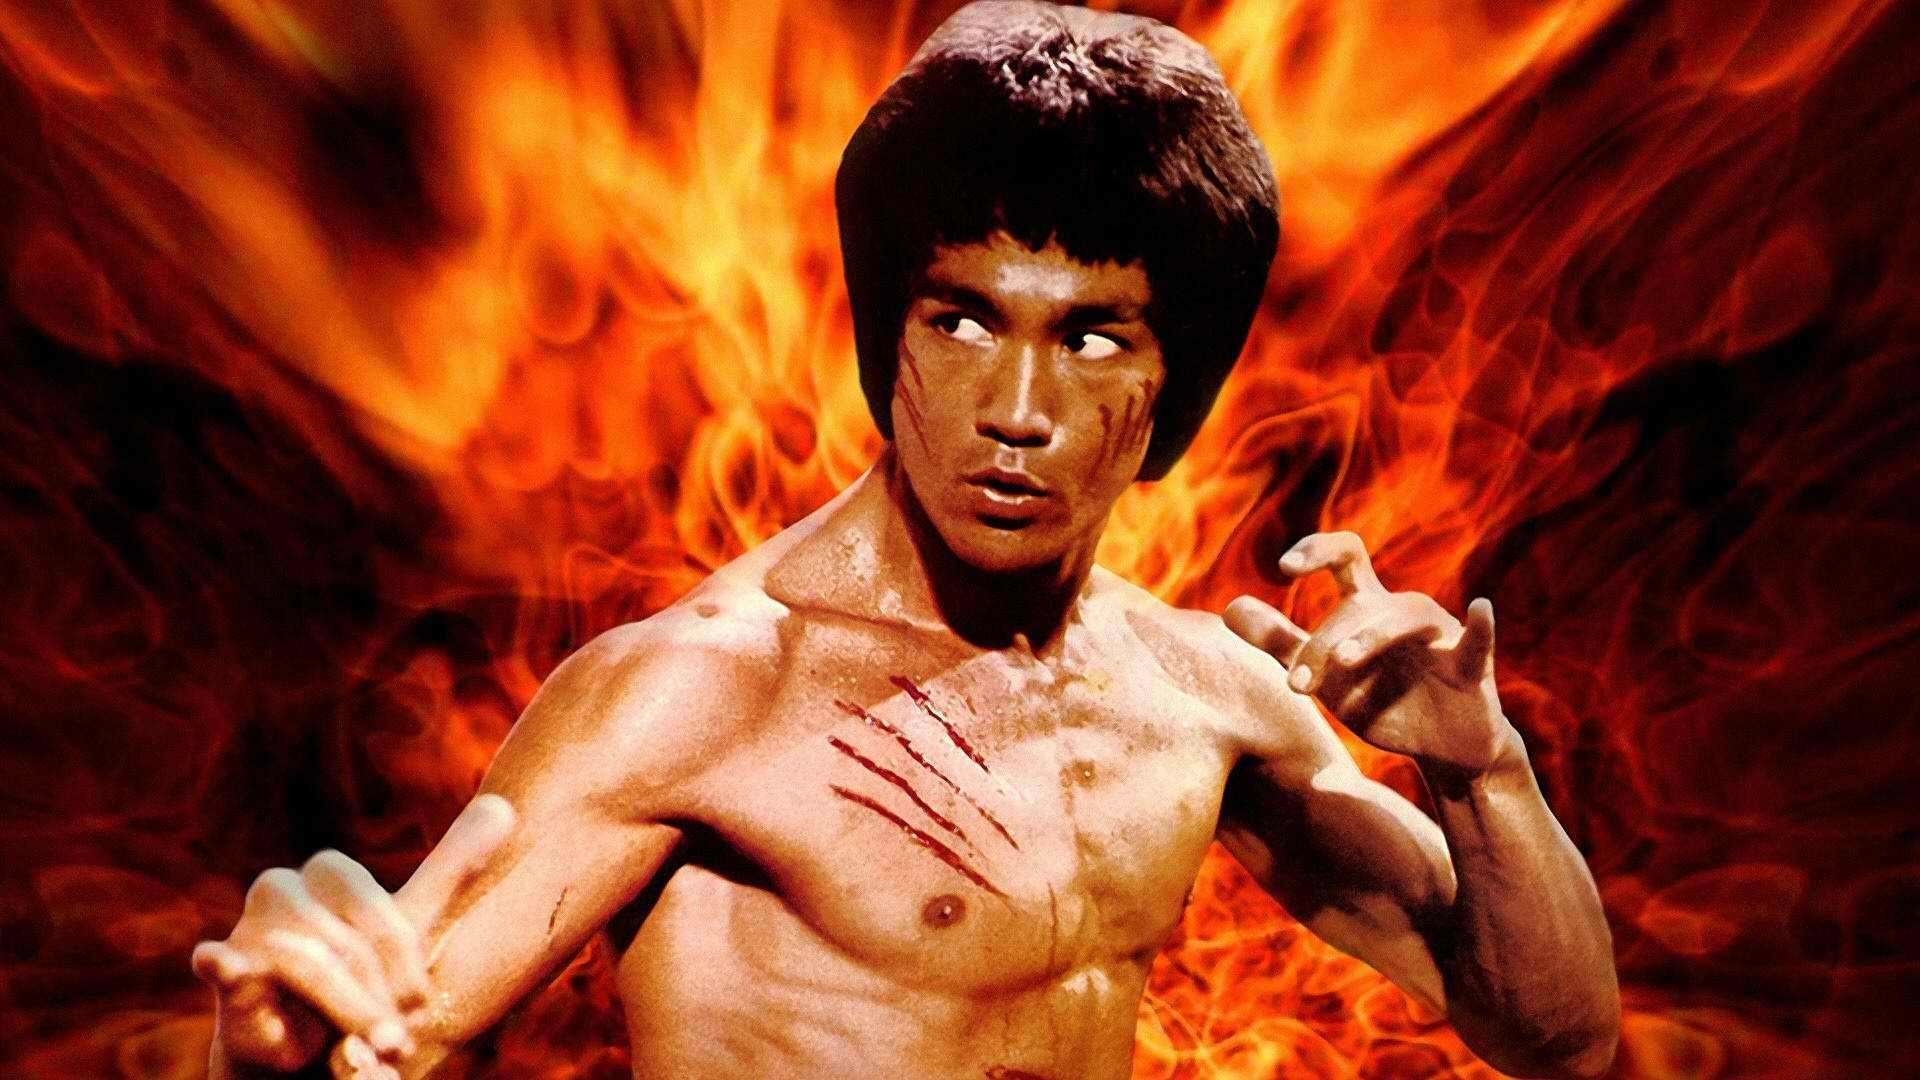 1920x1080 Bruce Lee Wallpapers 1080p On Wallpaper Hd 1920 x 1080 px 623.08 KB wing  chun enter